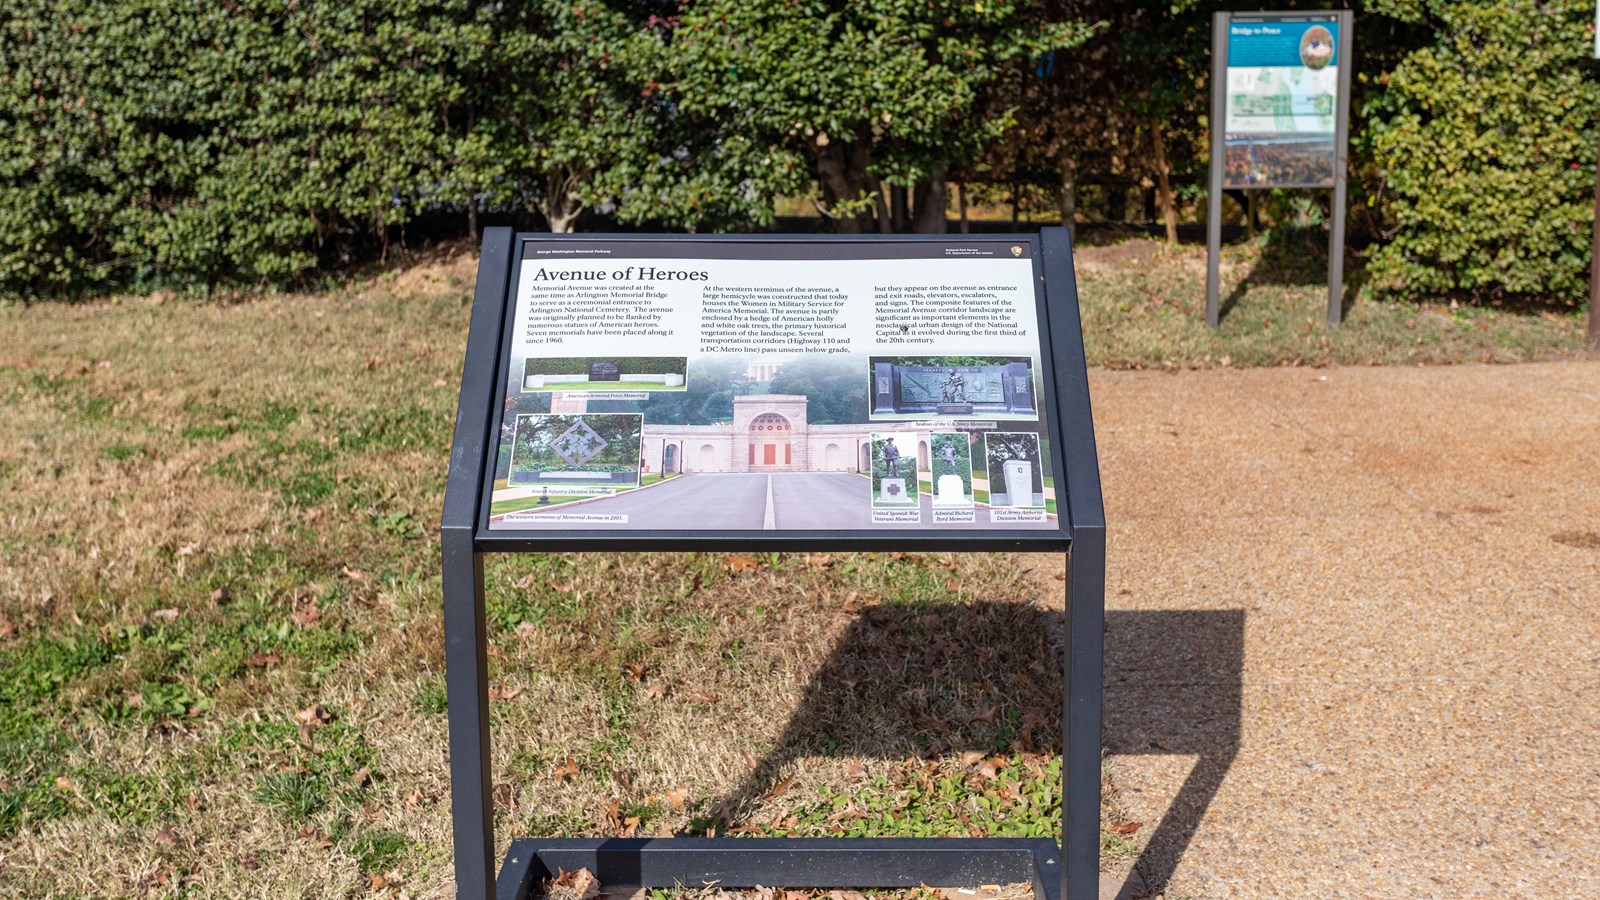 Information panel with images of various nearby memorials.